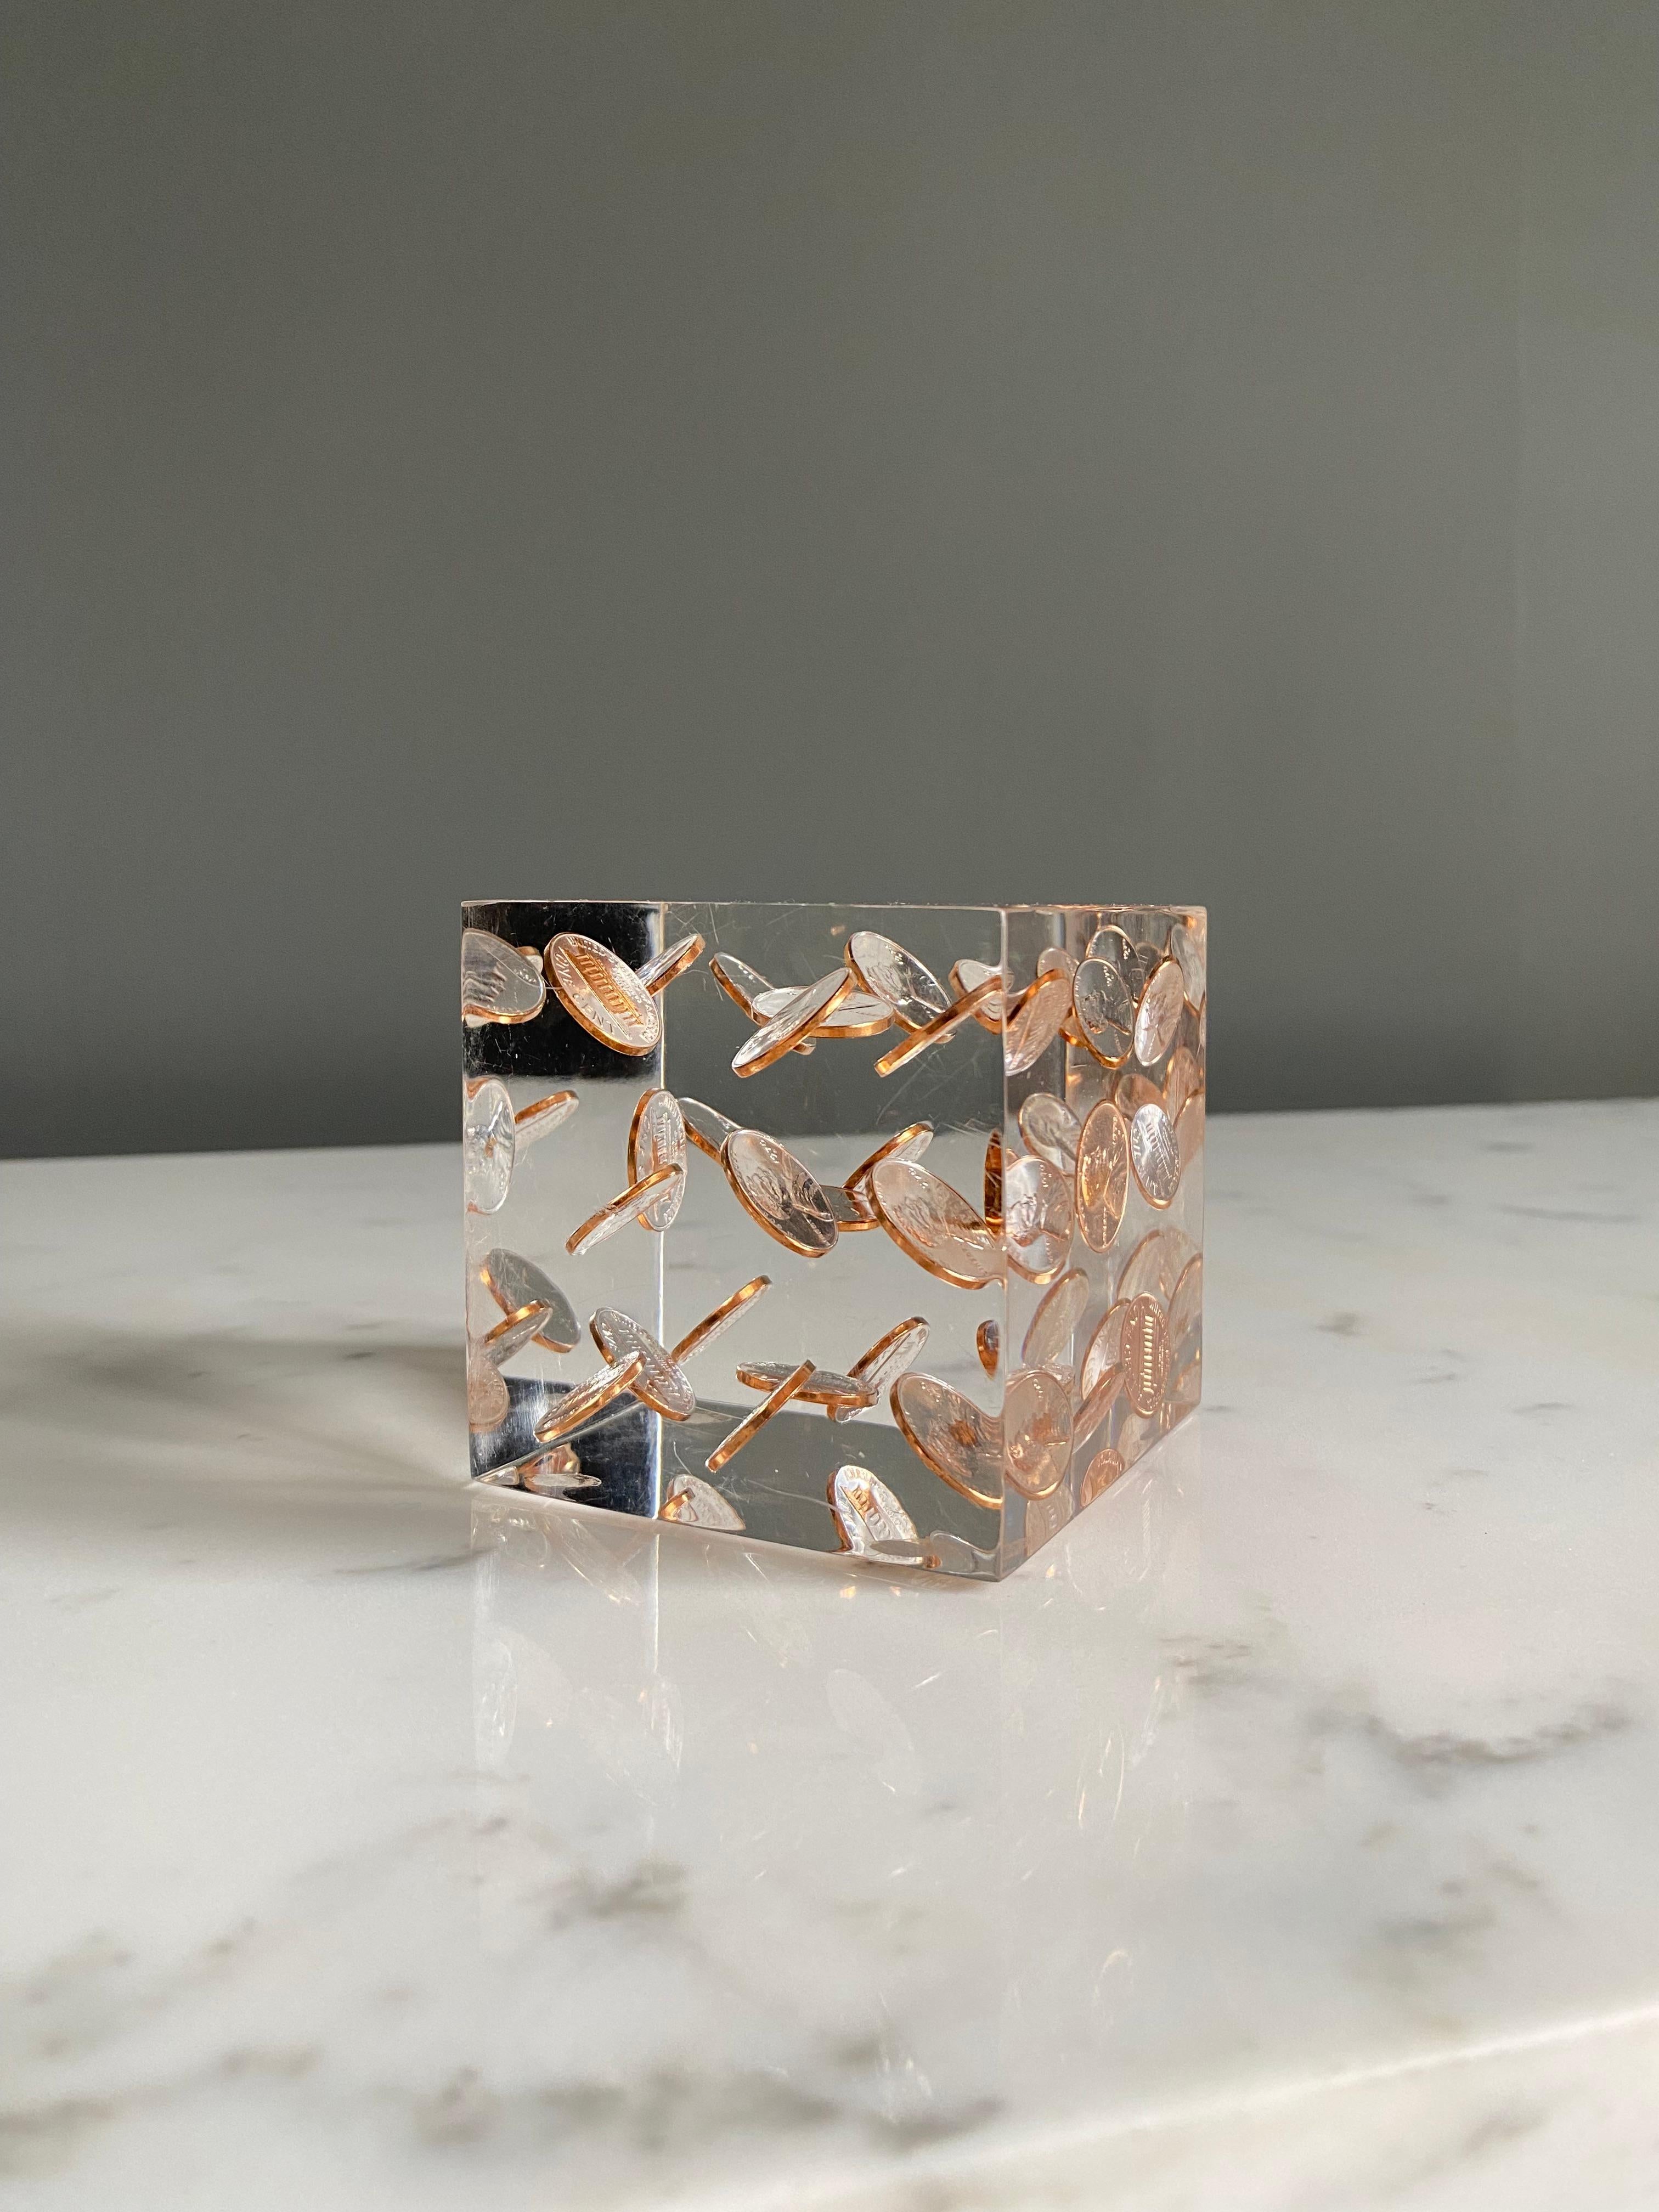 Floating 1970's Pennies in Lucite Cube Paperweight / Sculpture 2